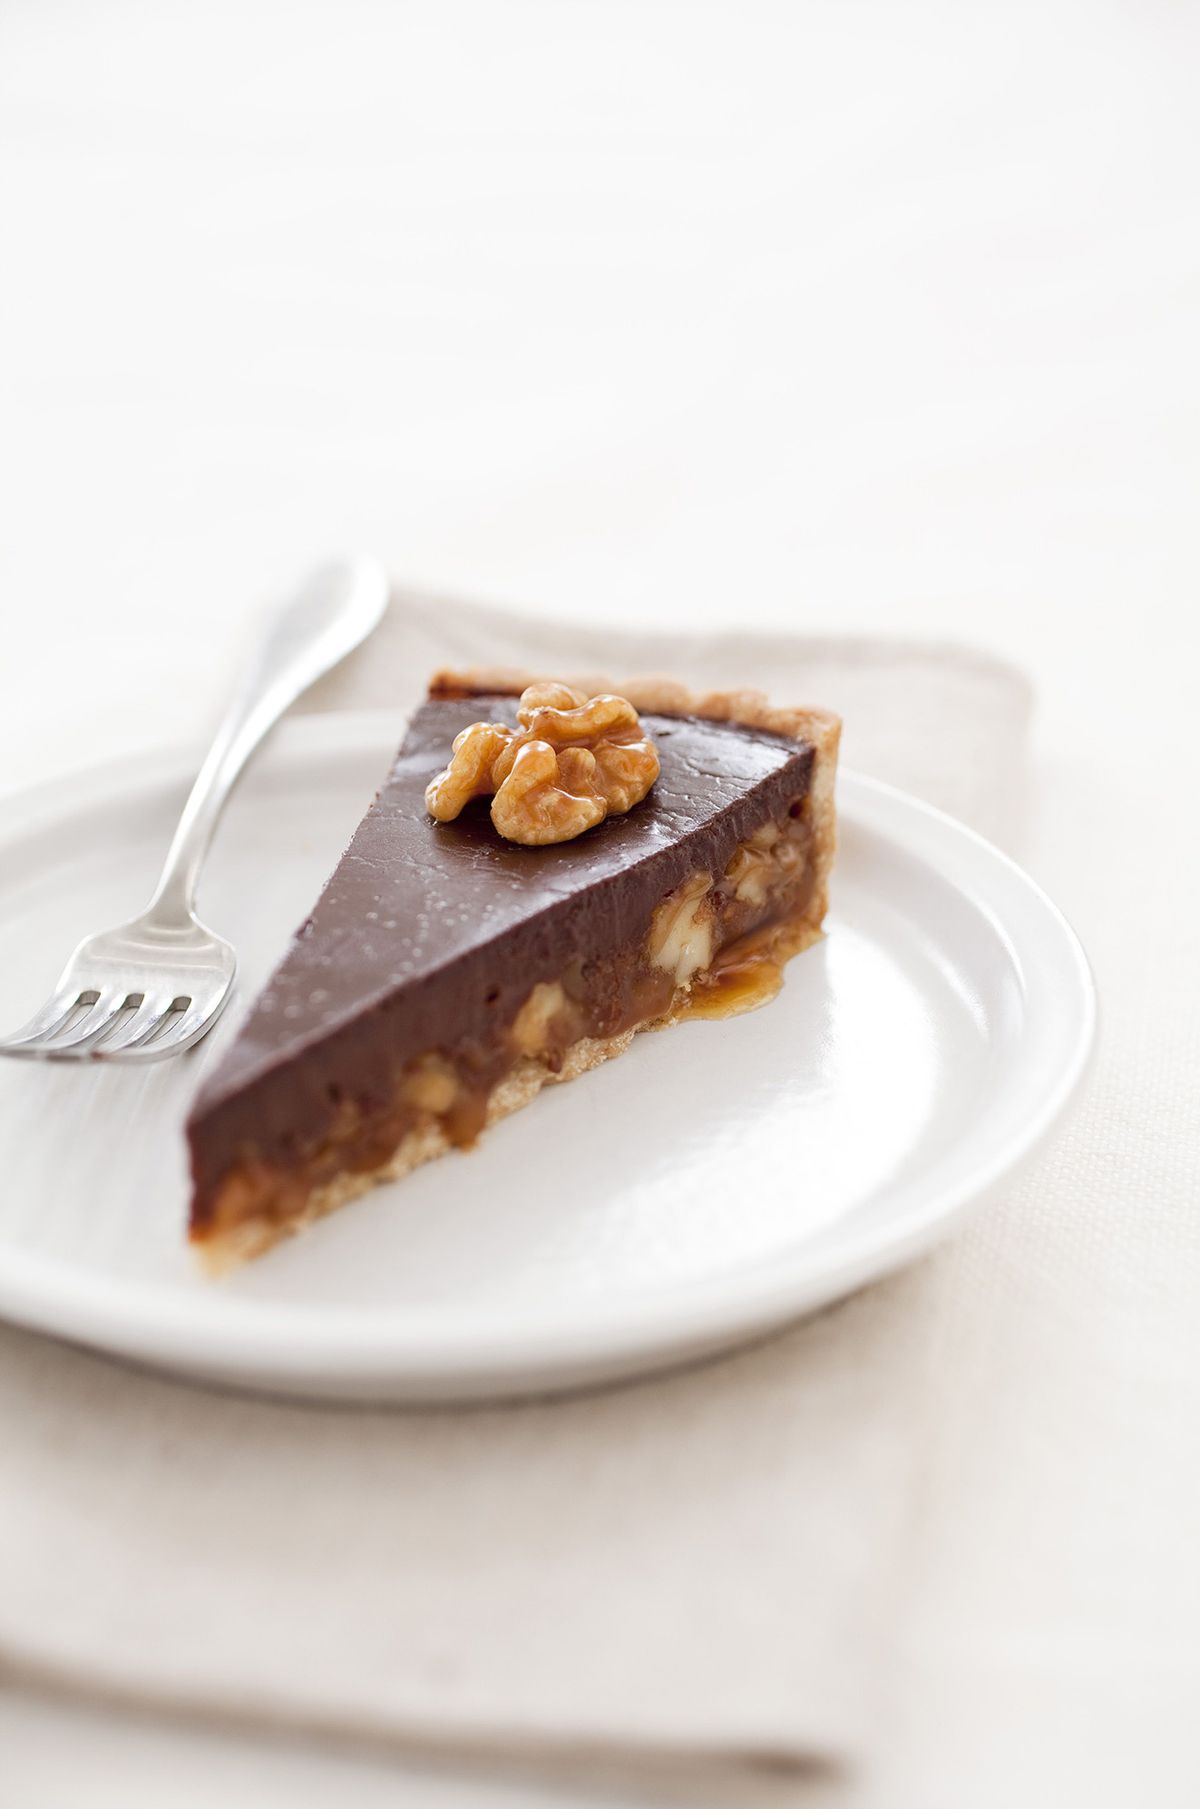 Chocolate Caramel Walnut Tart from “Cook’s Illustrated Baking Book.”